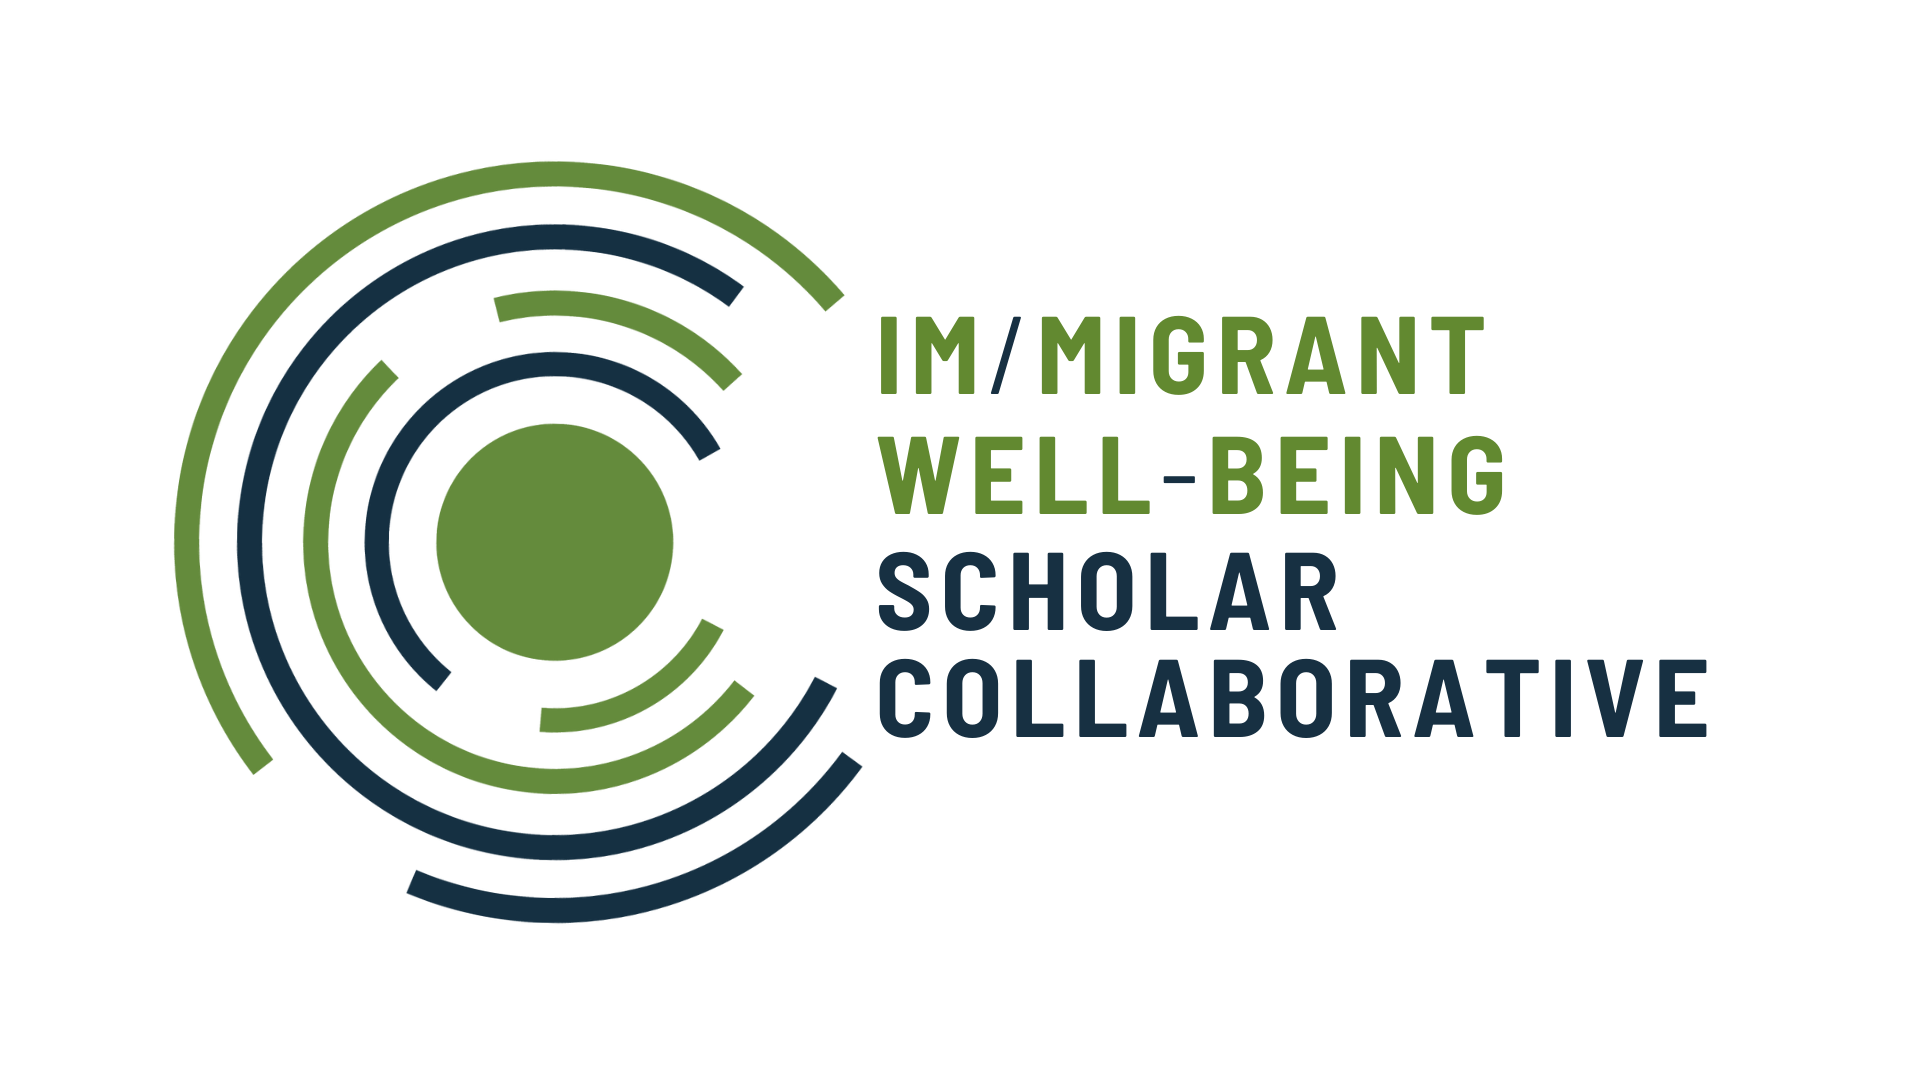 Im/migrant Well-Being Scholar Collaborative